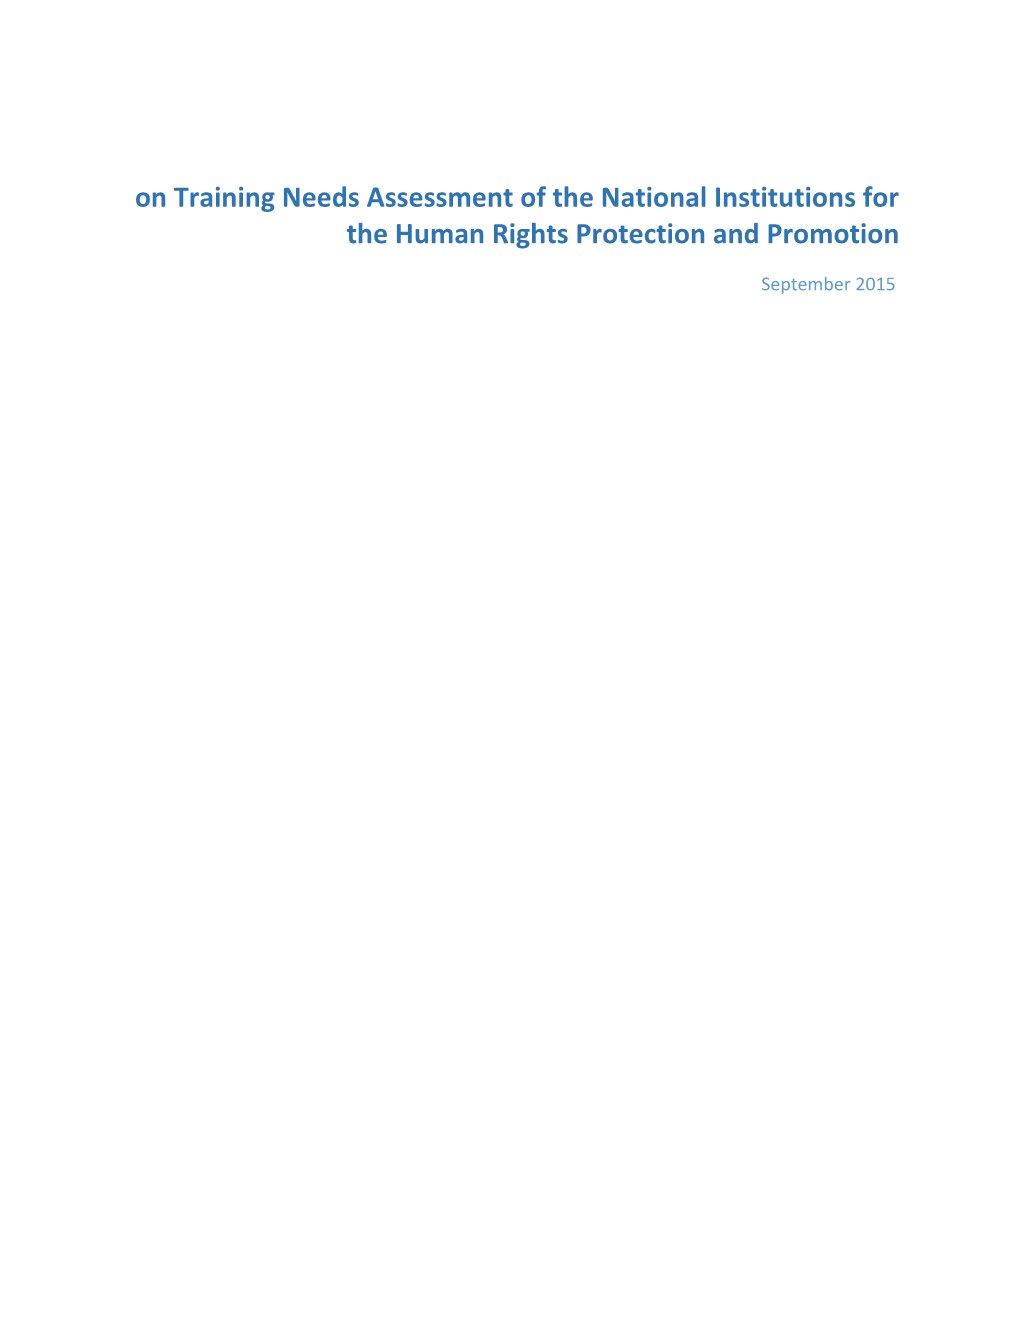 On Training Needs Assessment of the National Institutions for the Human Rights Protection